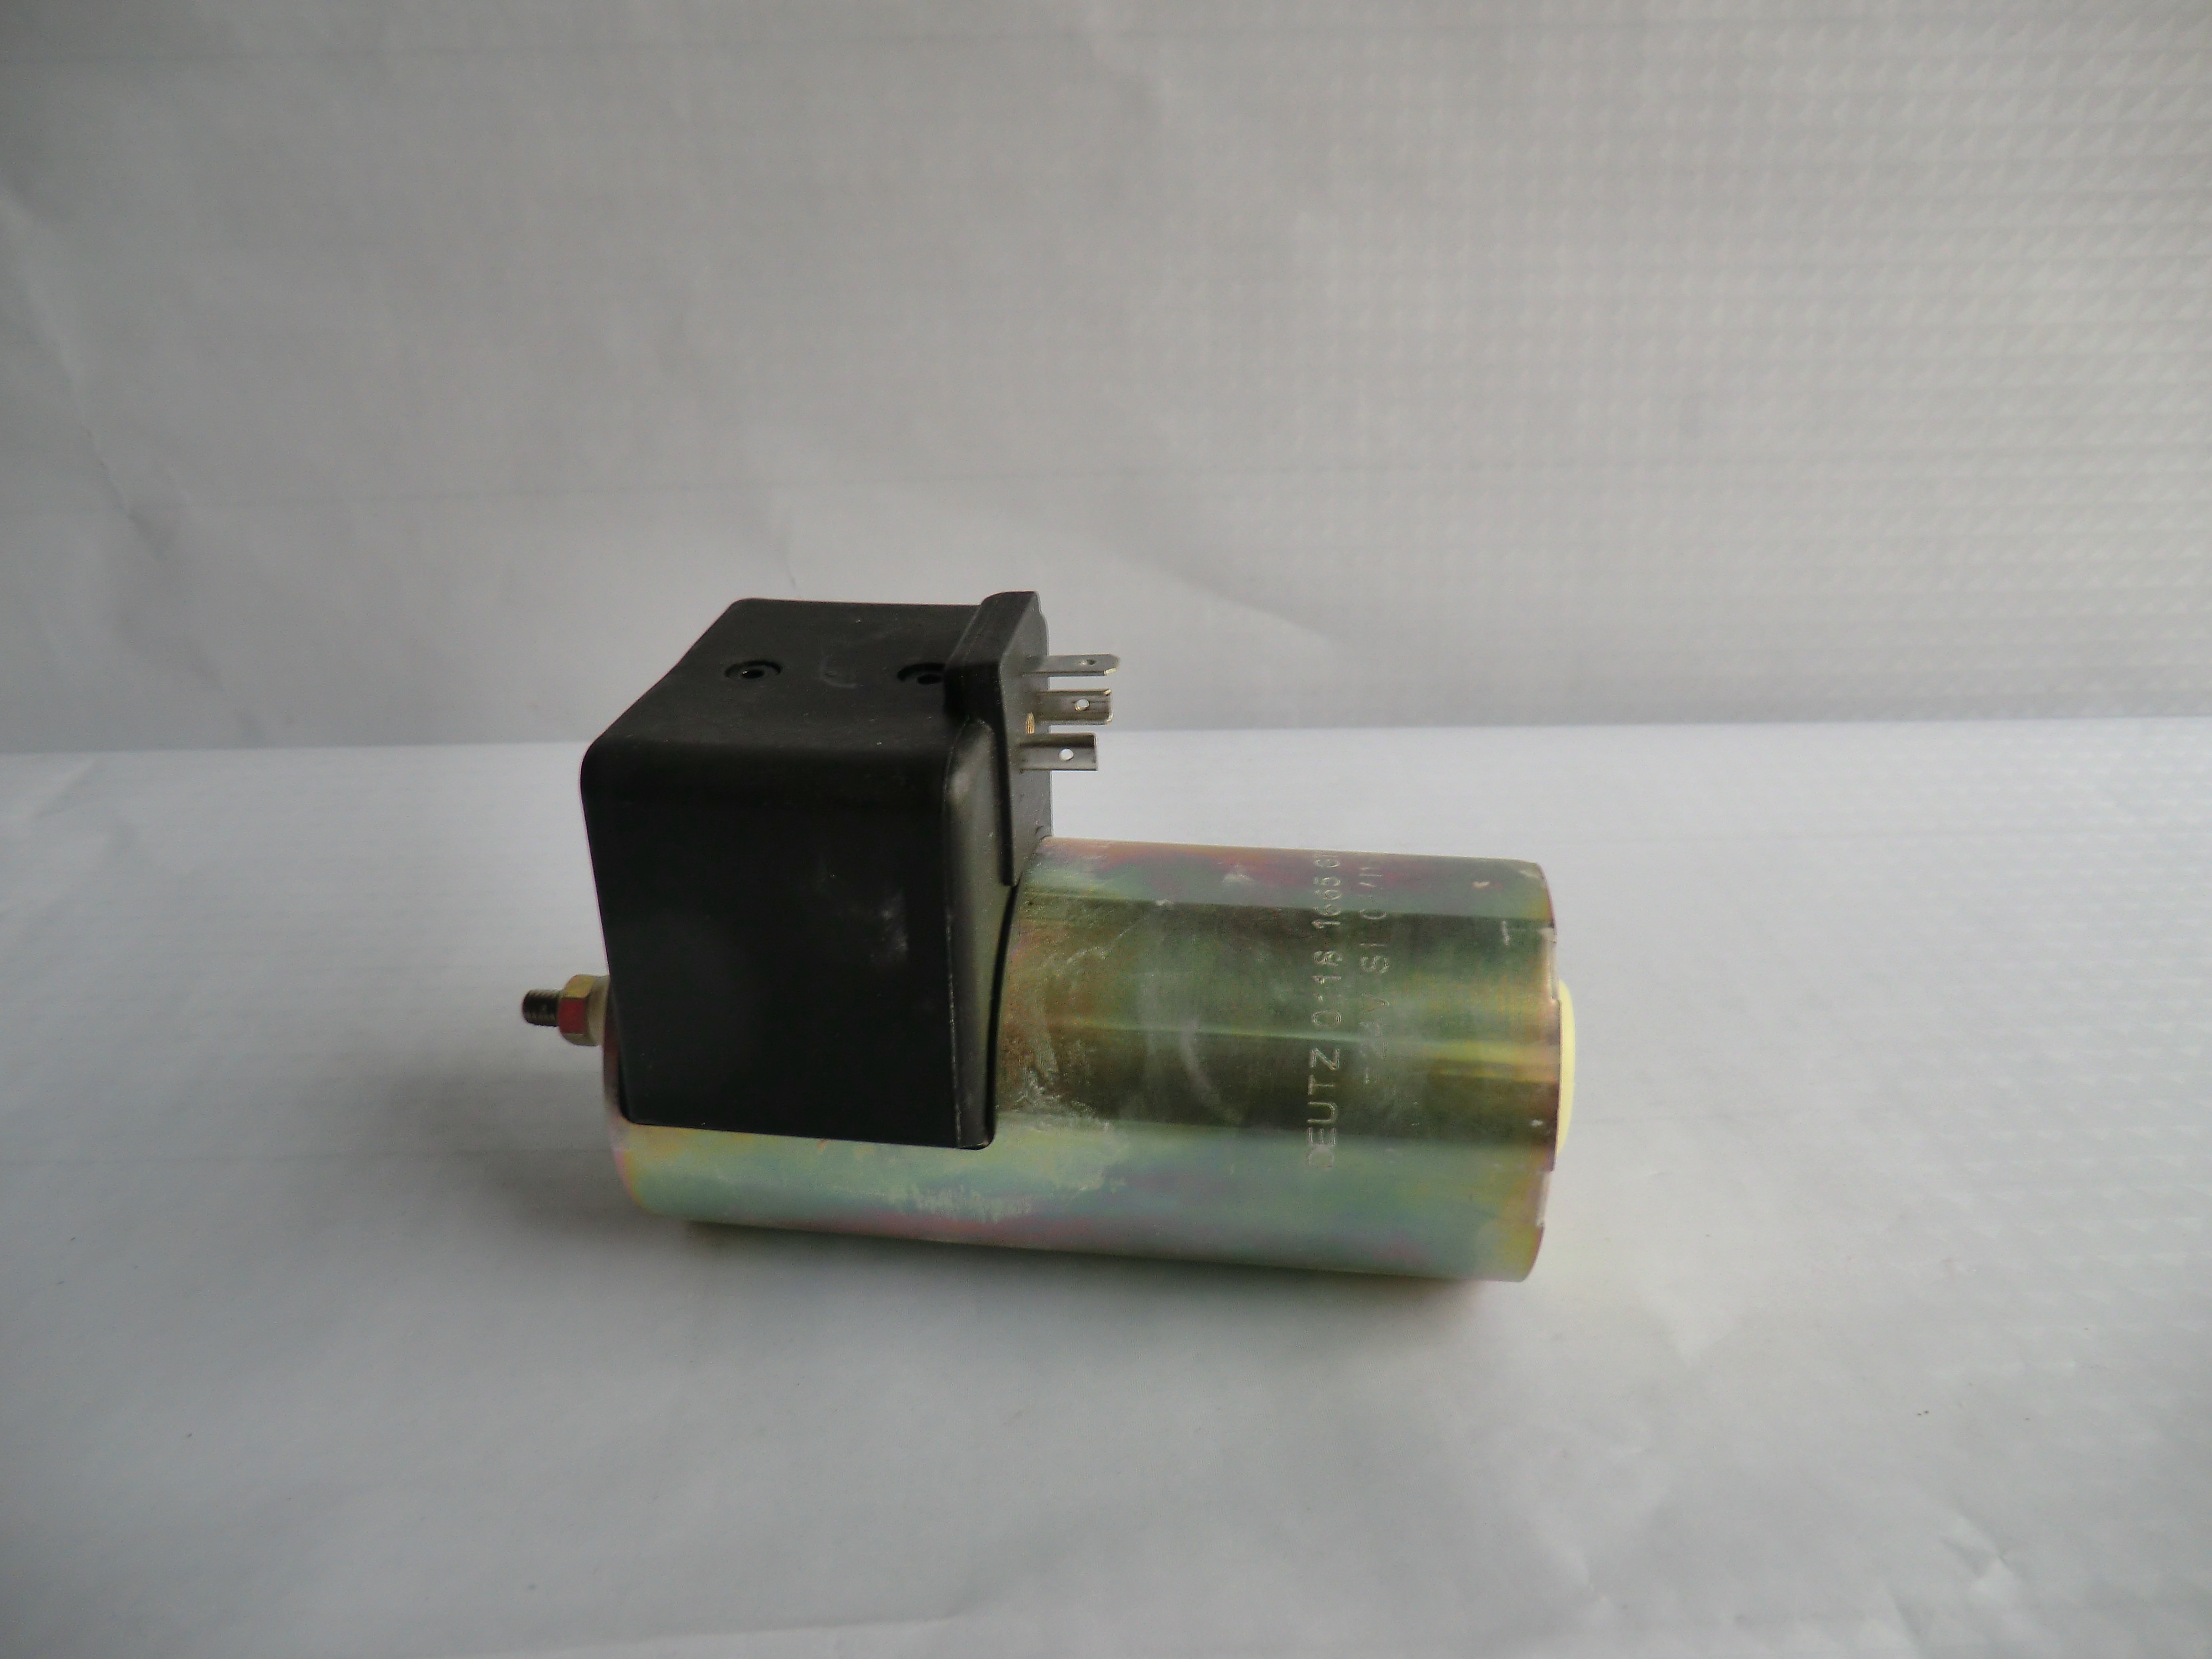 Causes And Solutions For The Lax Closing Of The Shutdown Solenoid Valve